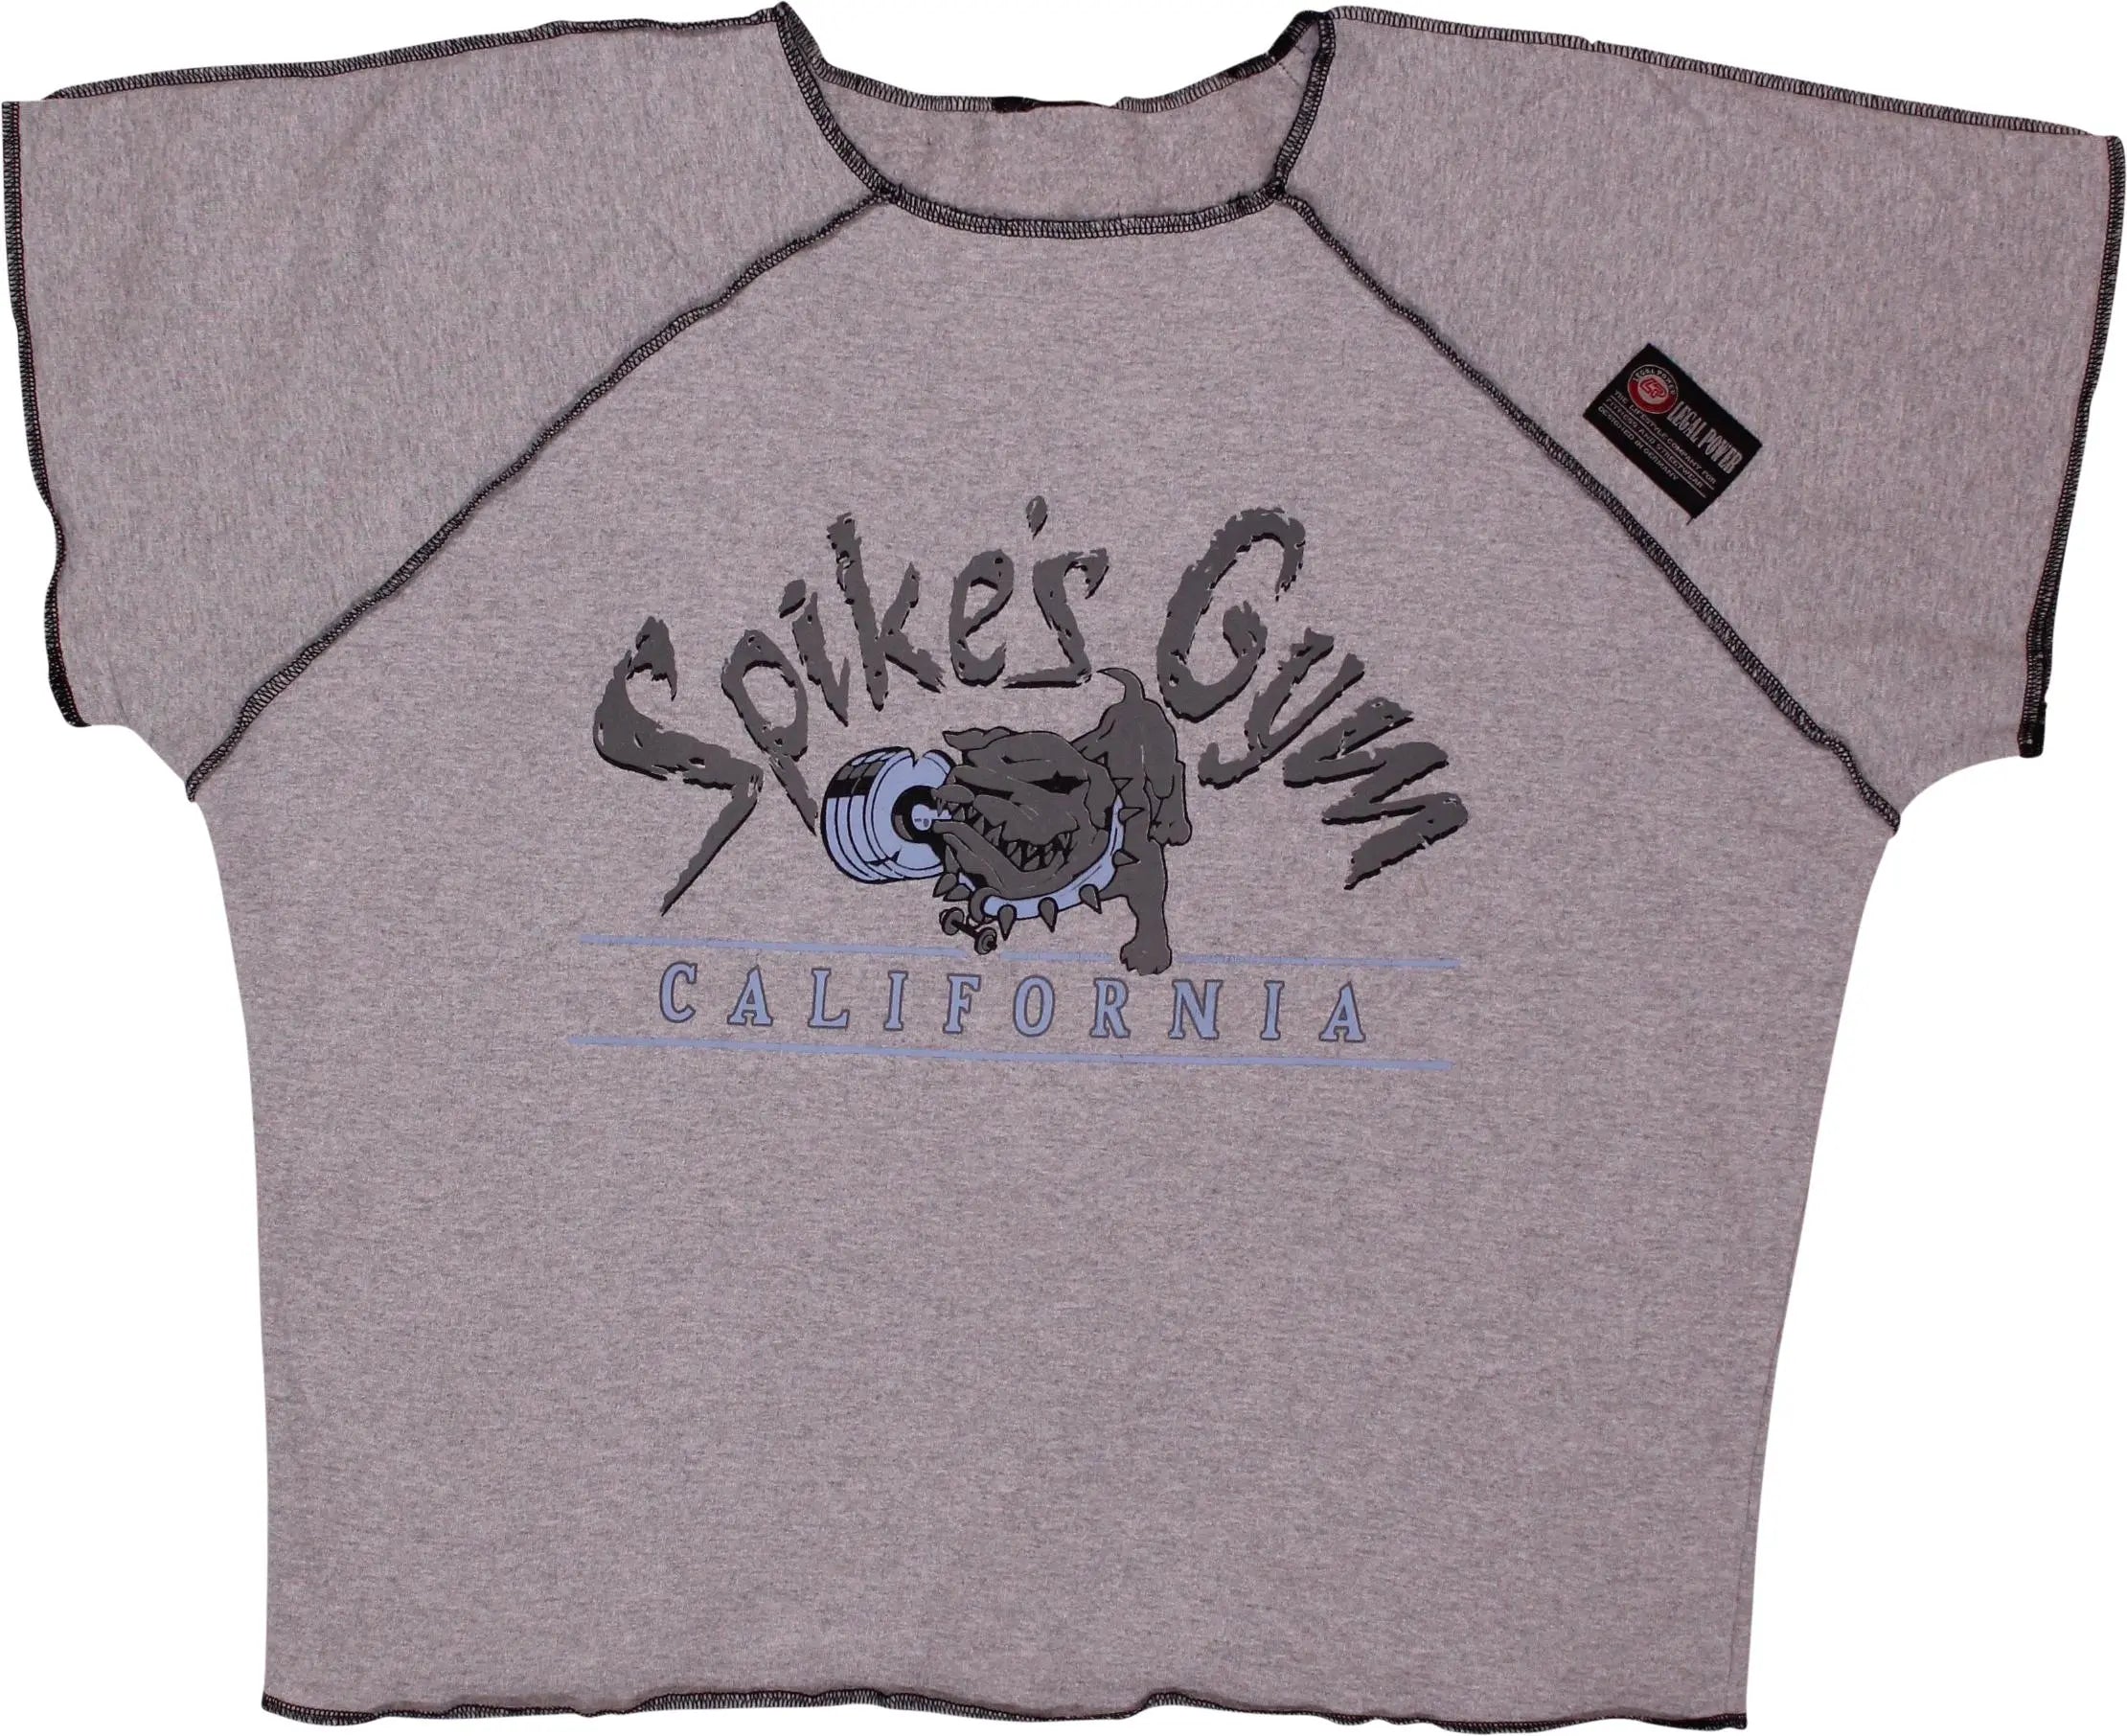 Legal Power - Spike's Gym California T-shirt- ThriftTale.com - Vintage and second handclothing